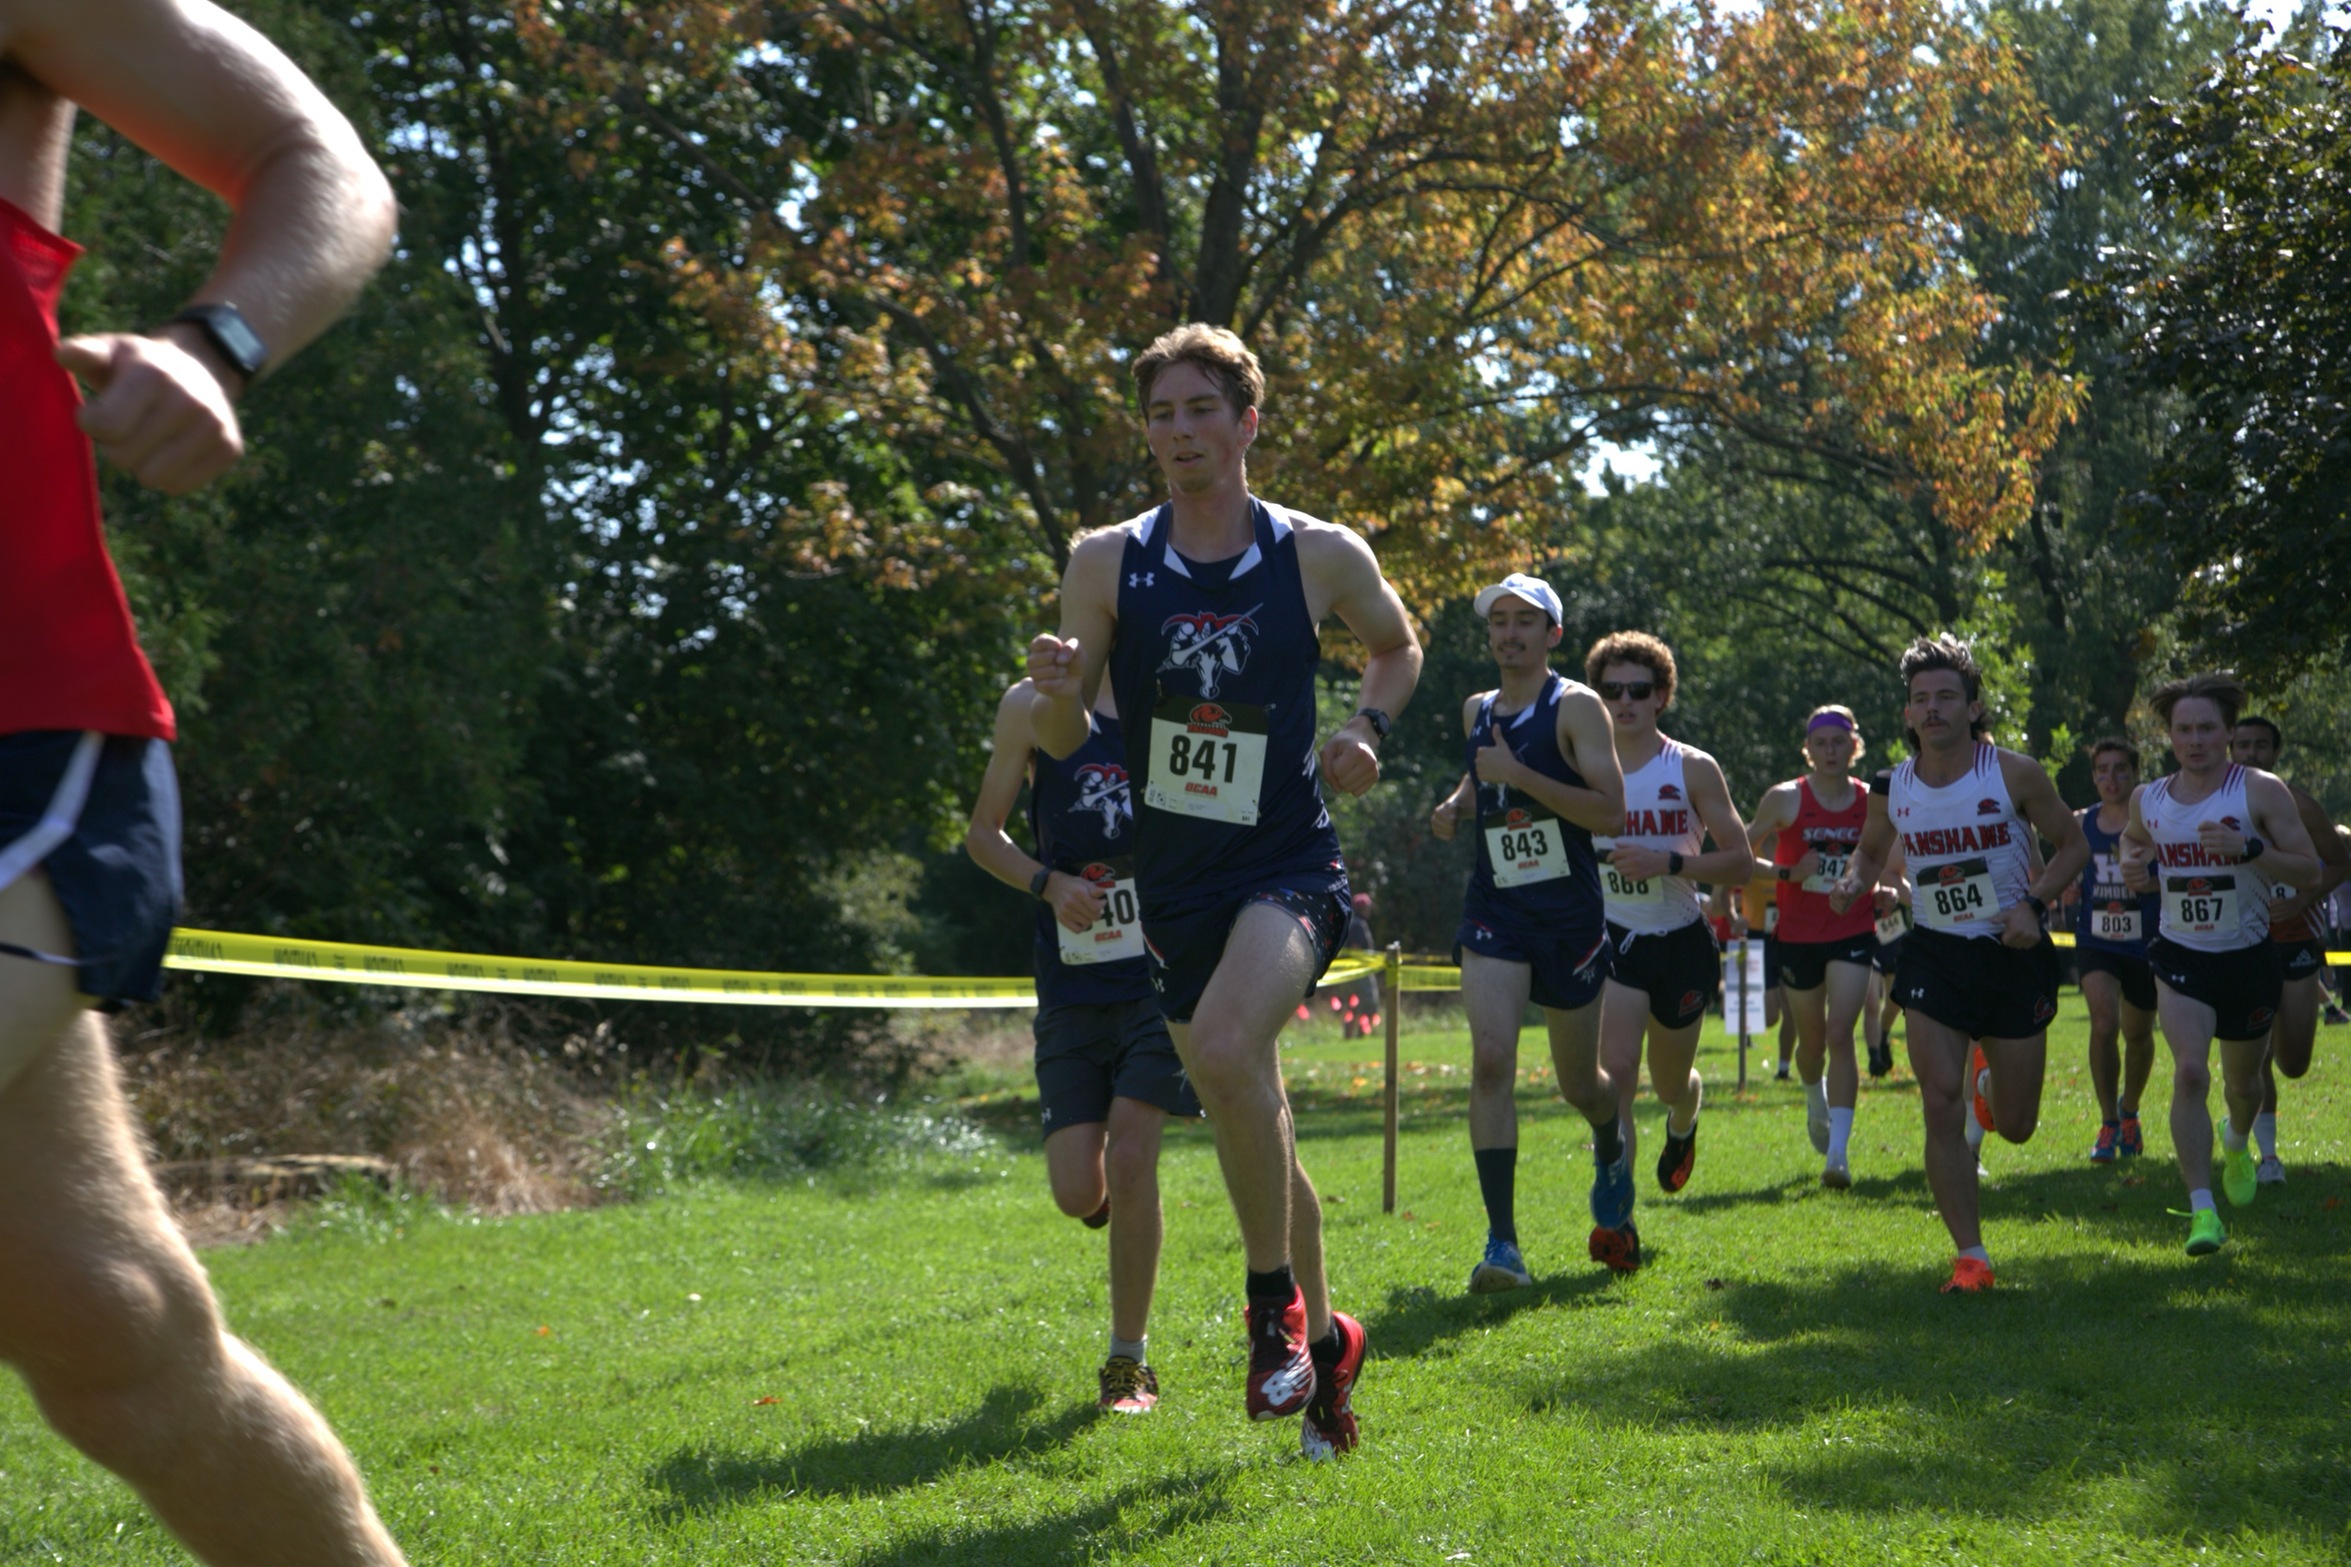 X-COUNTRY SHOWING IMPROVEMENT IN SECOND RACE